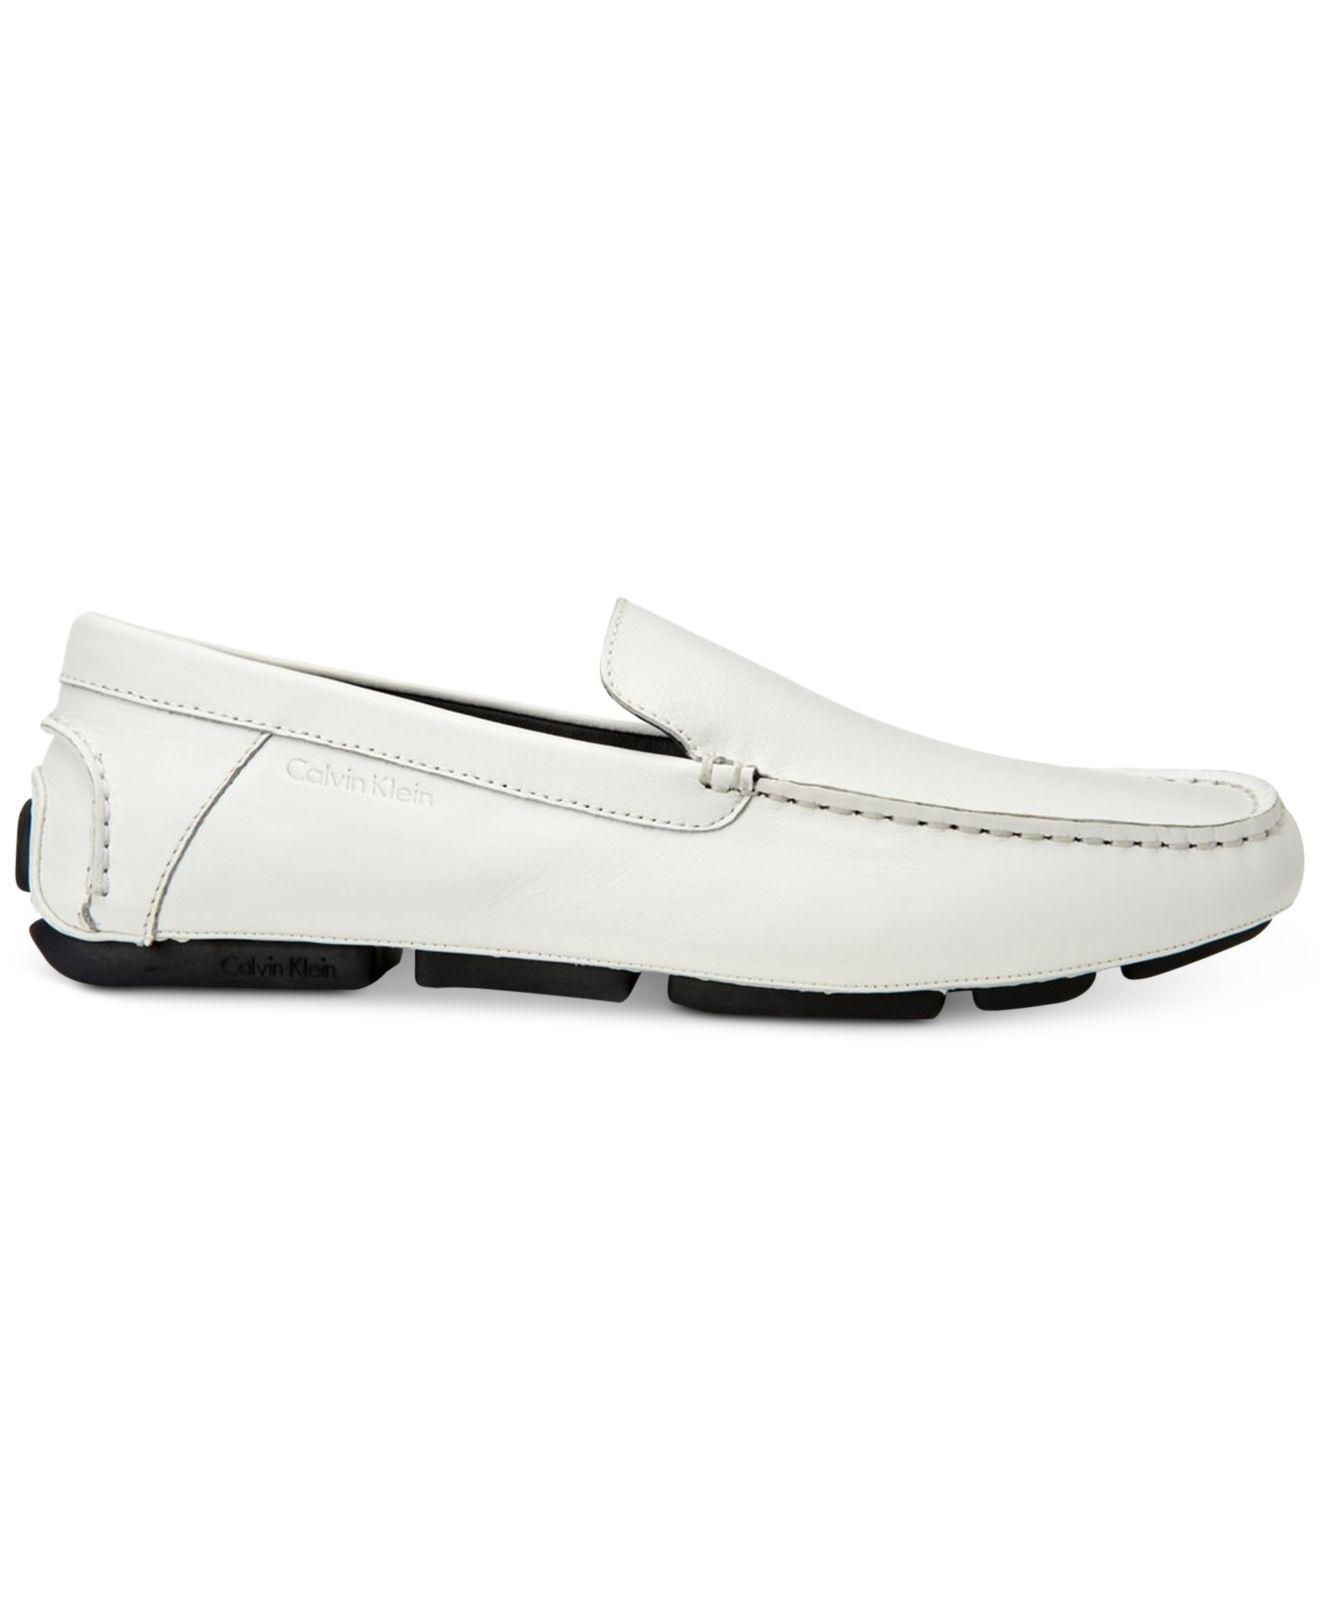 Calvin Klein Men's Miguel Nappa Leather Loafers Latvia, SAVE 45% -  eagleflair.com